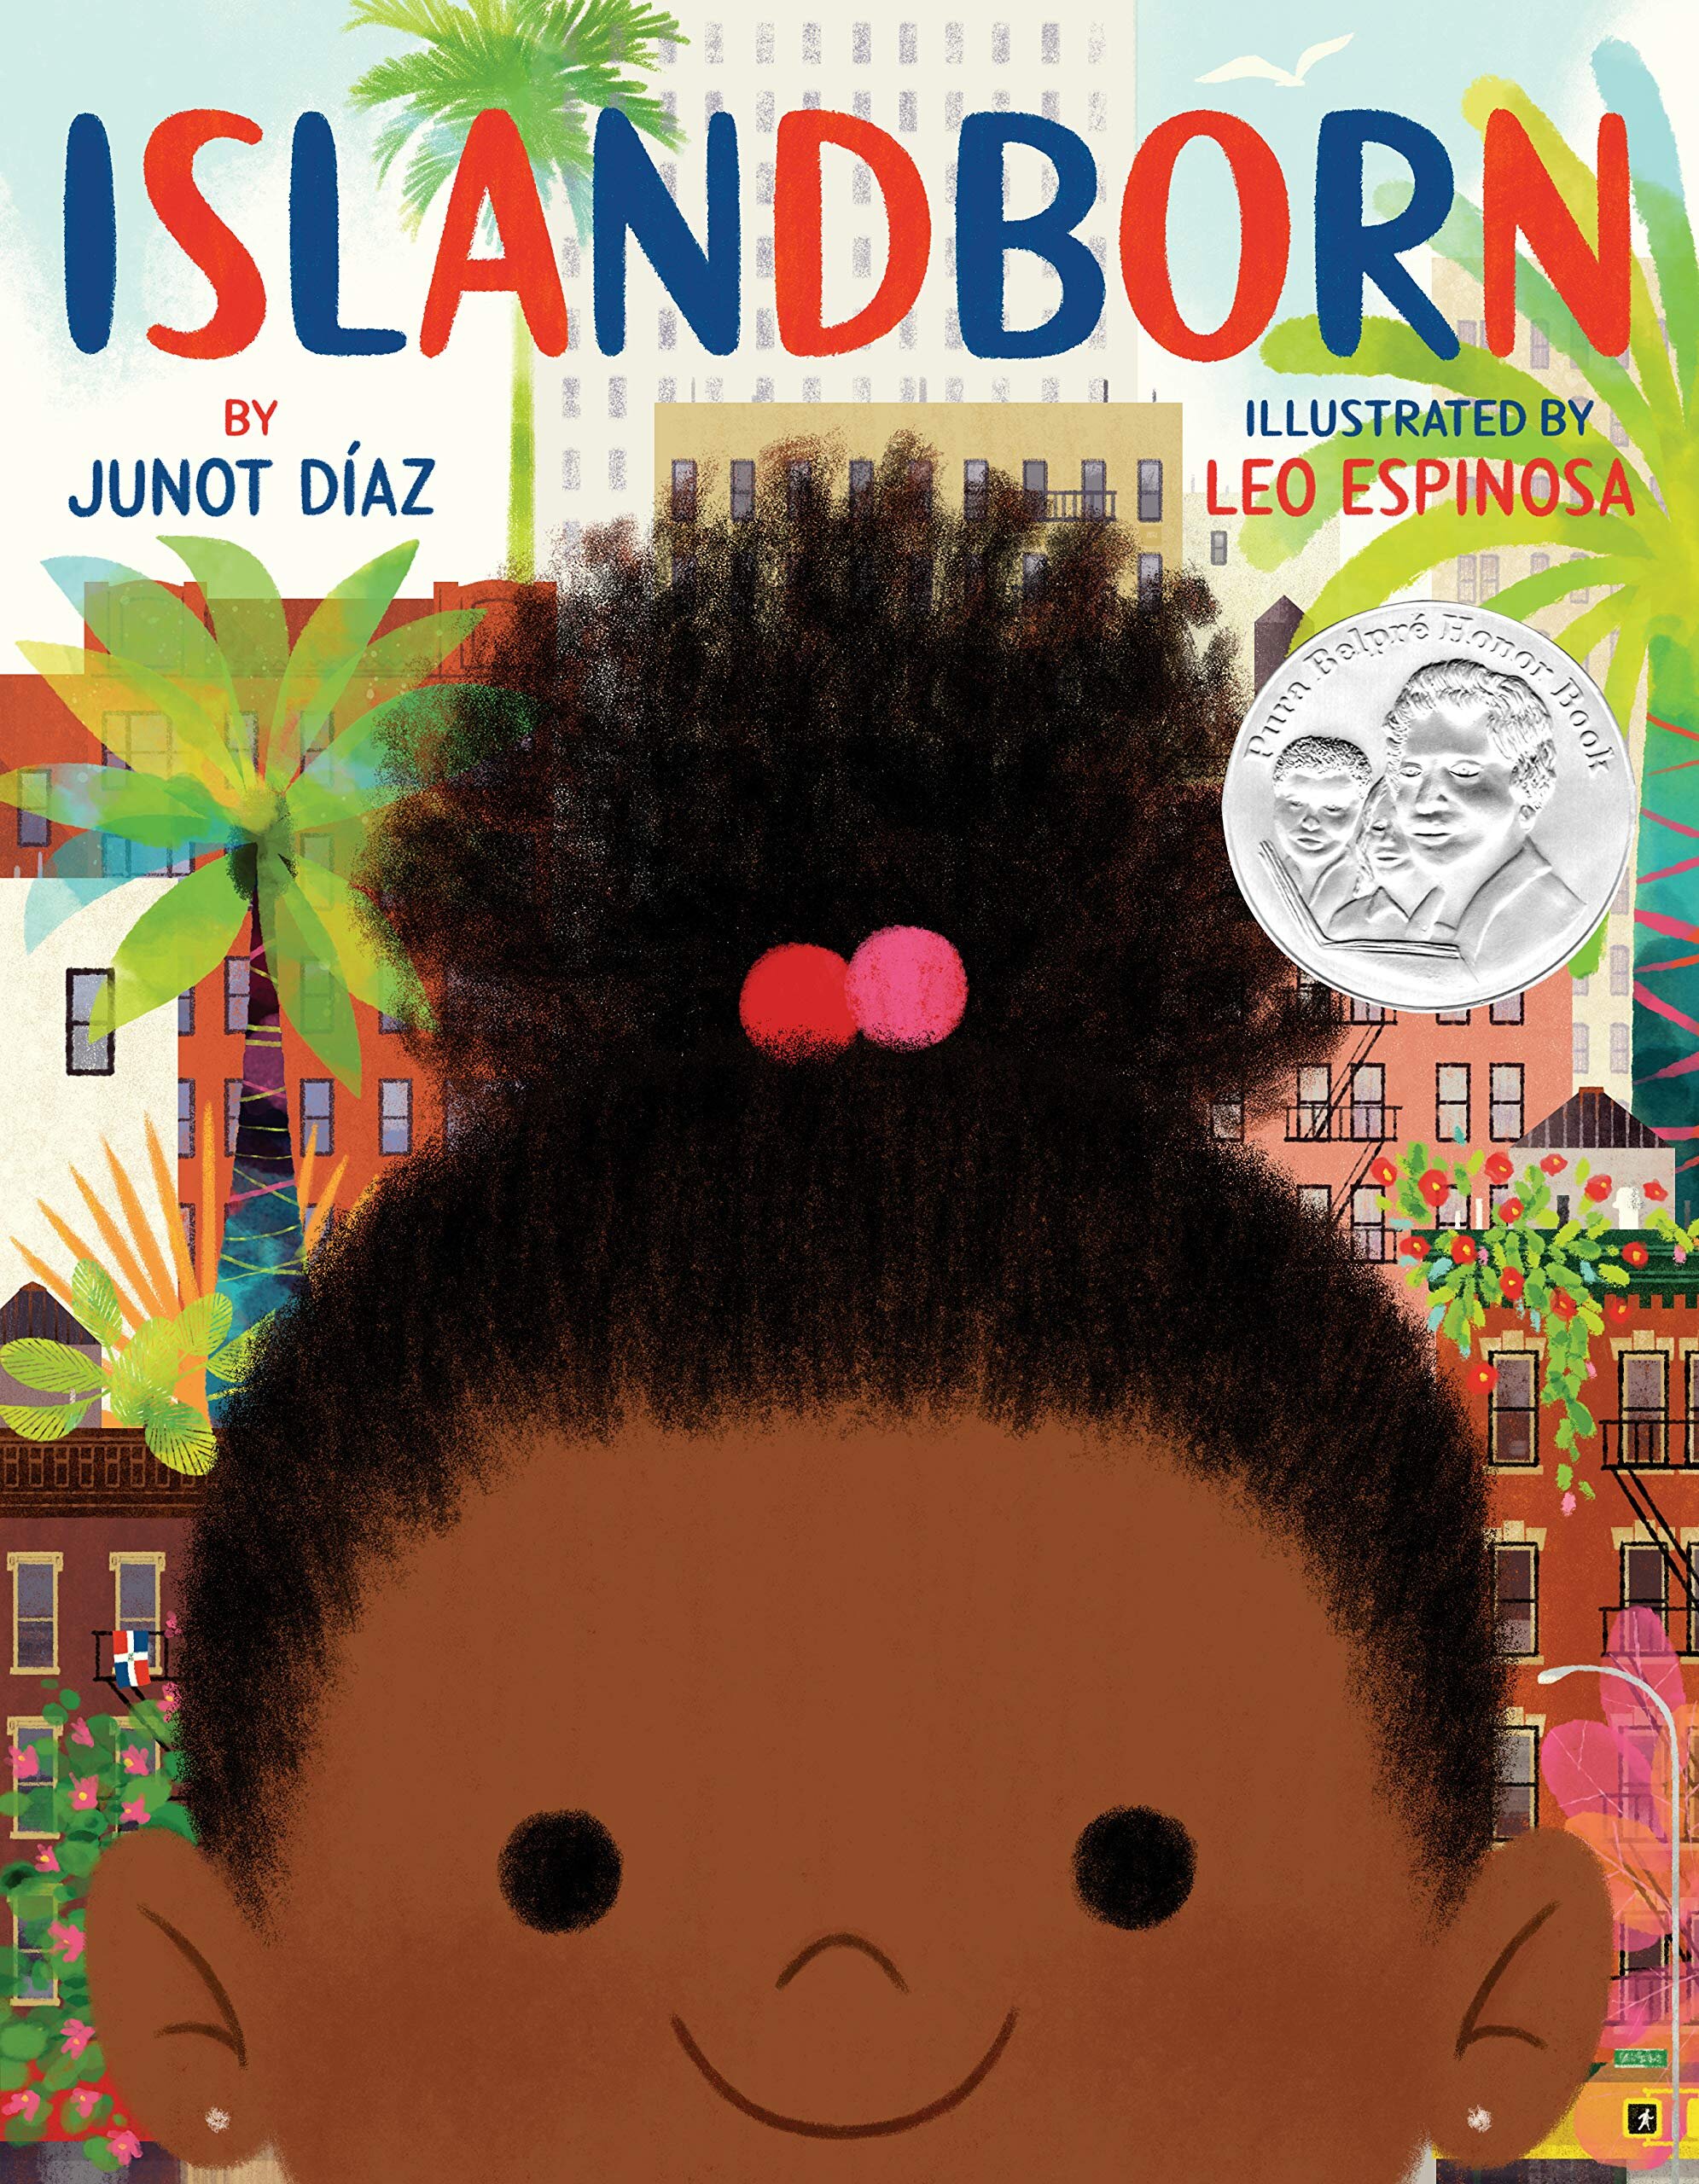 Islandborn –  Junot Díaz  (connections to culture and family history)